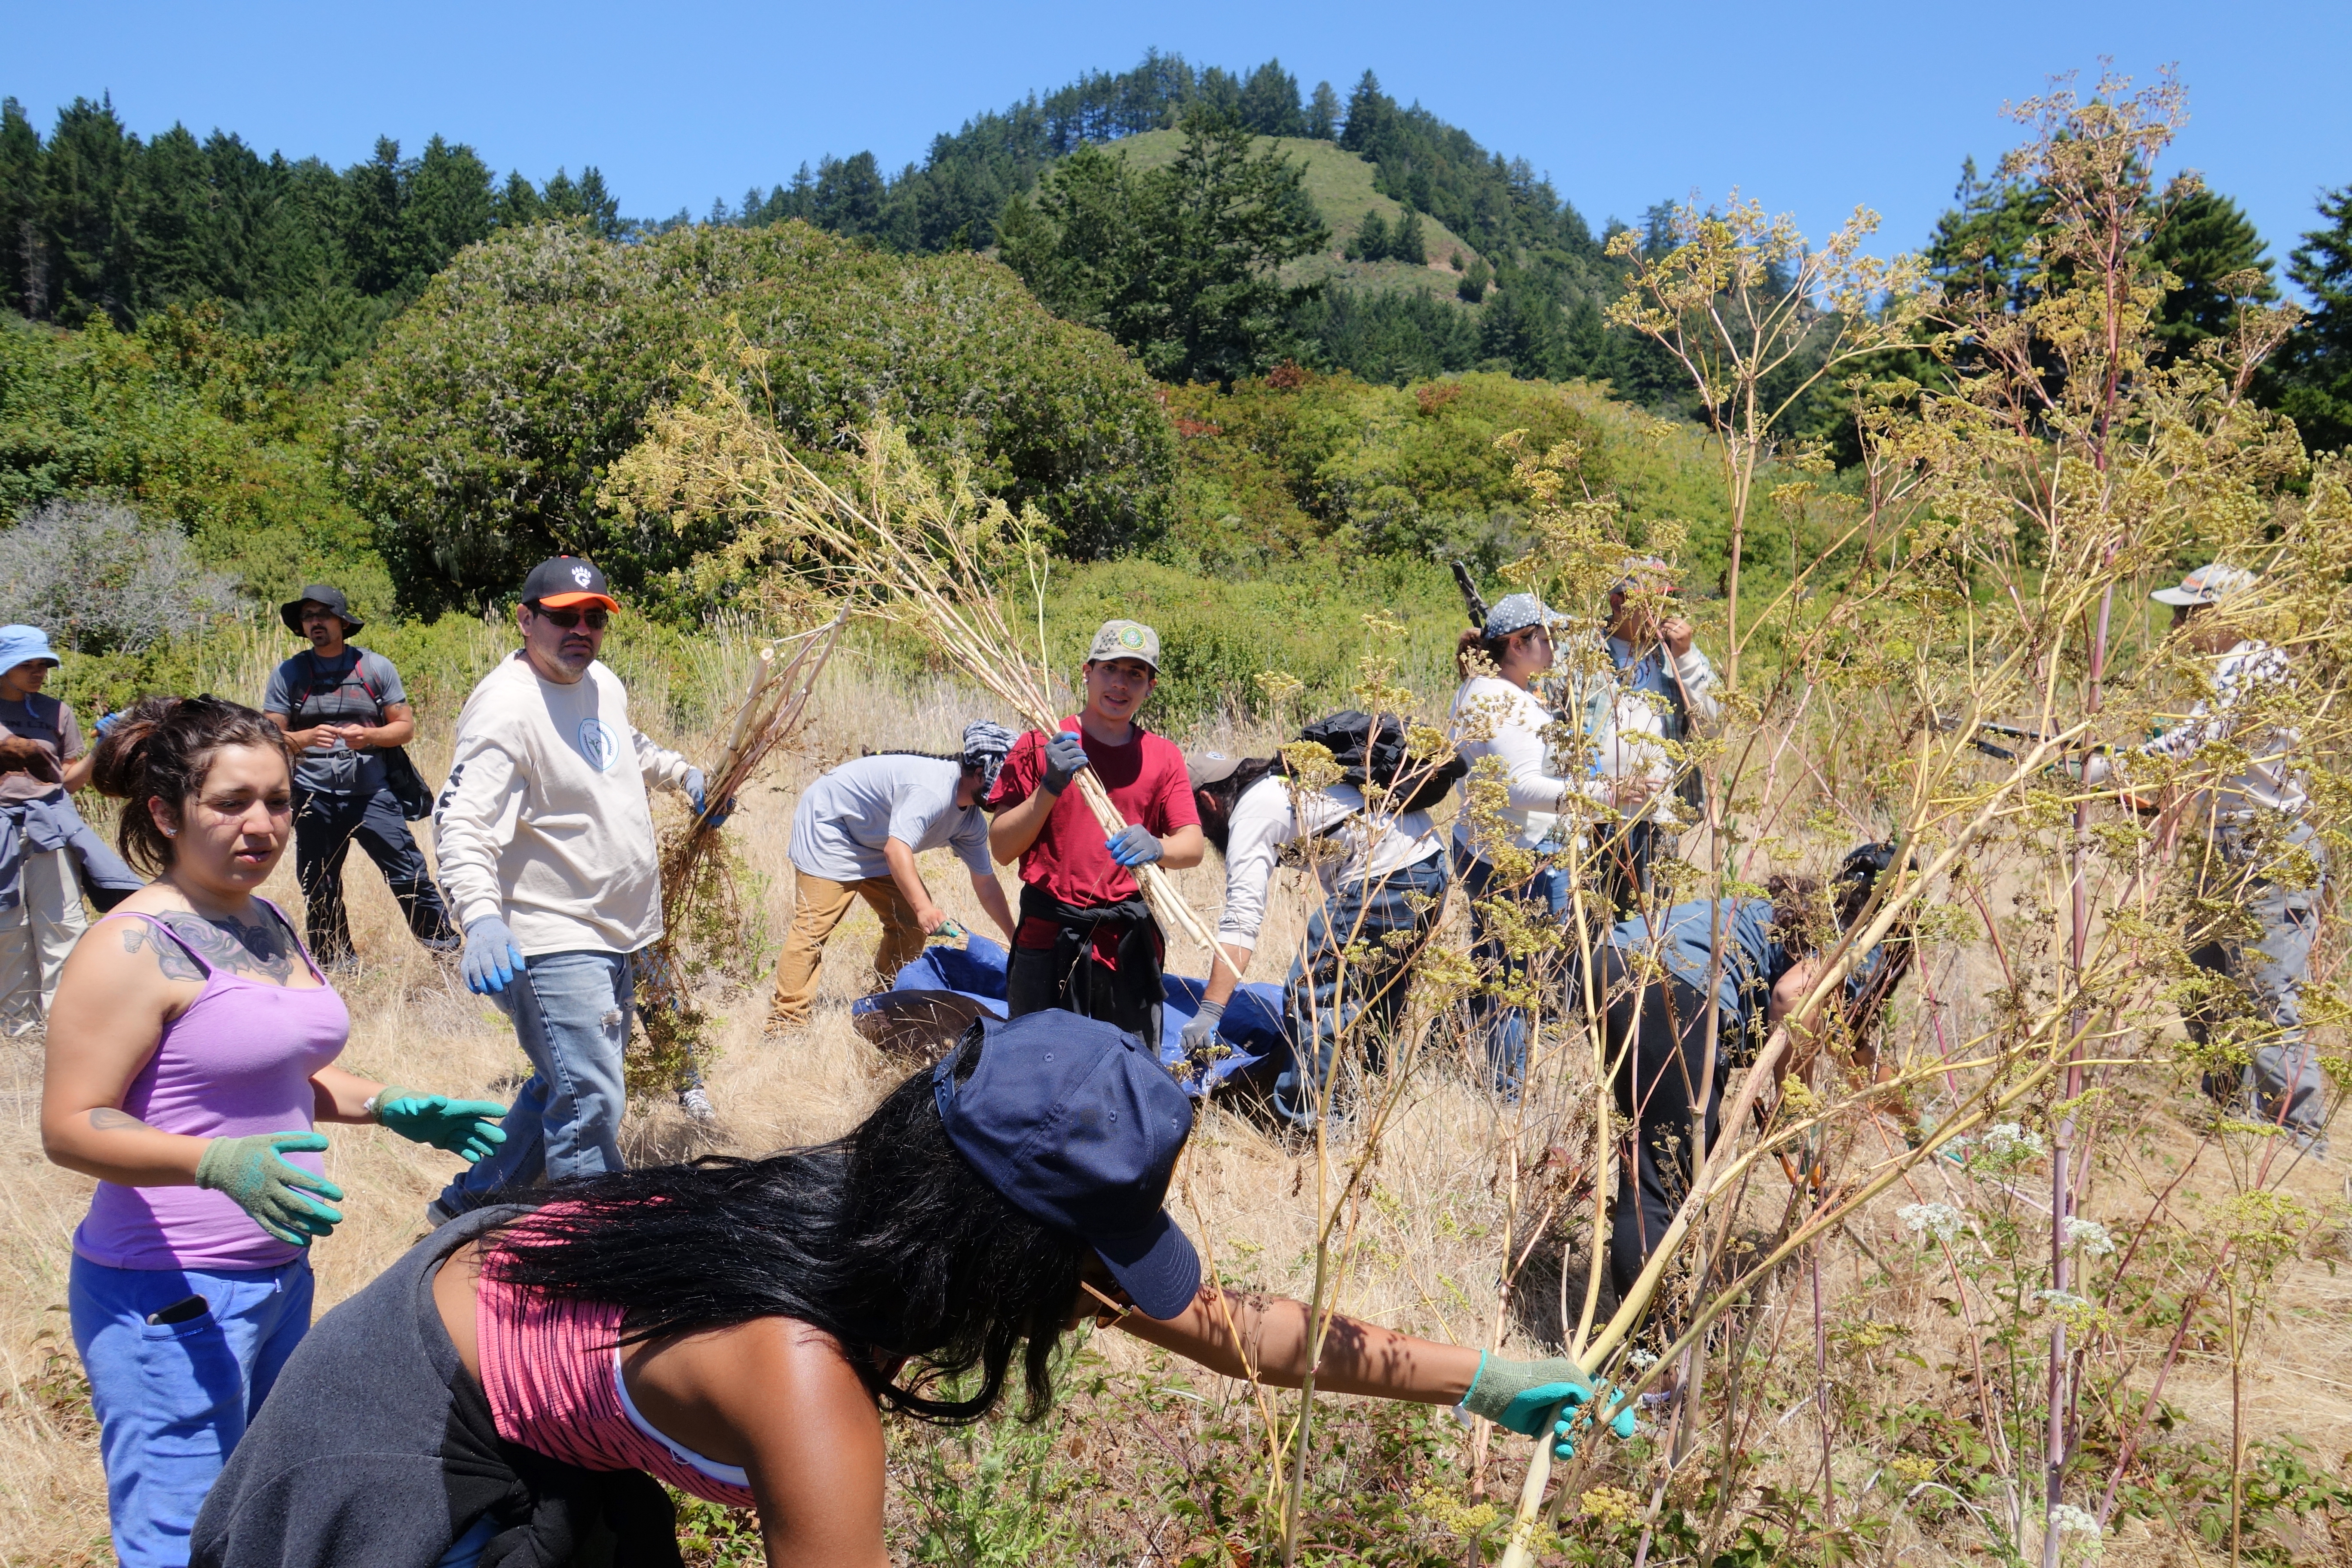 Getting hands-on stewardship experience removing invasive plants. Photo courtesy Cat Wilder.